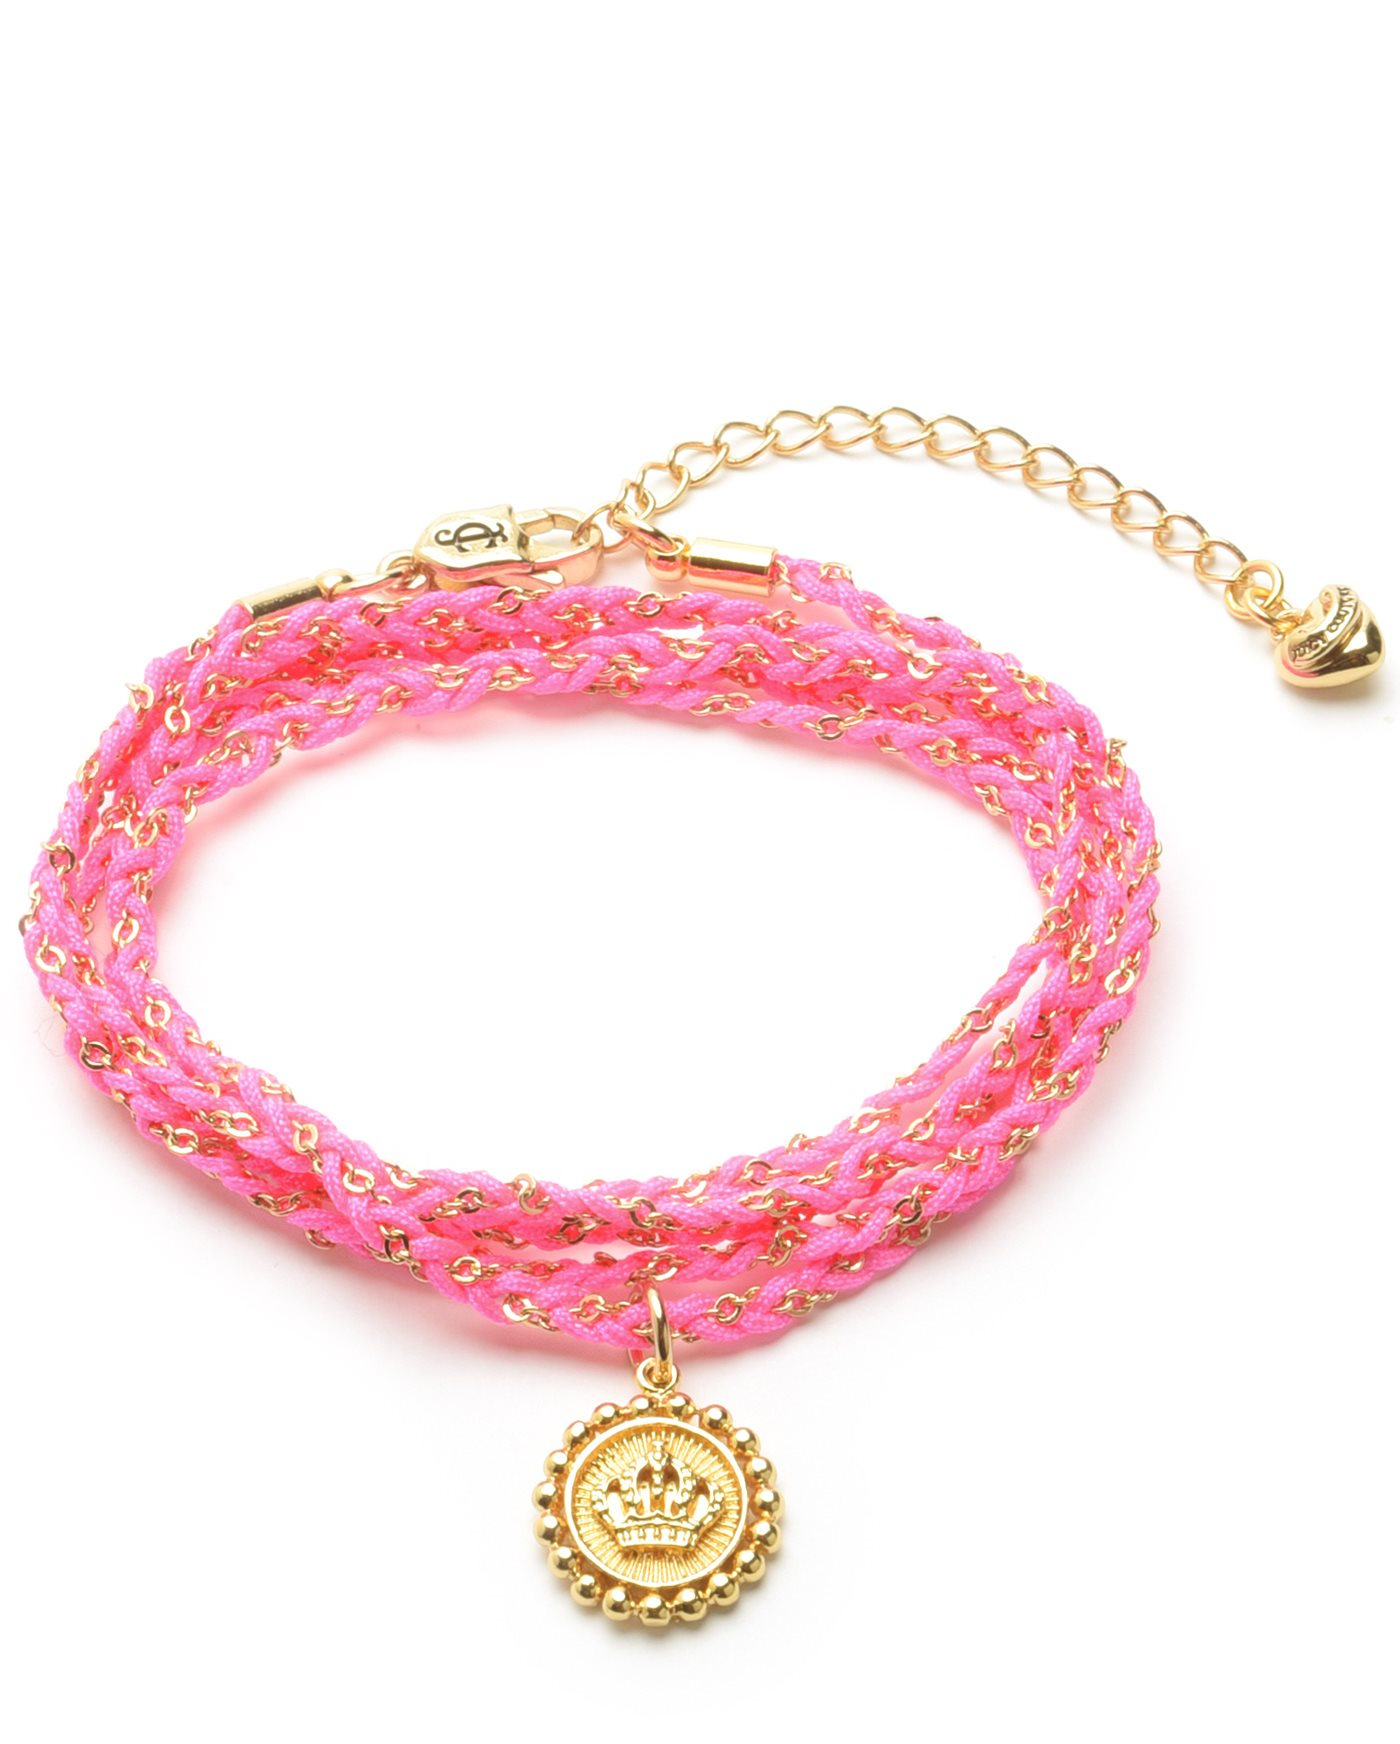 Juicy couture Woven Cord Wrap Bracelet in Pink (UPNK) | Lyst